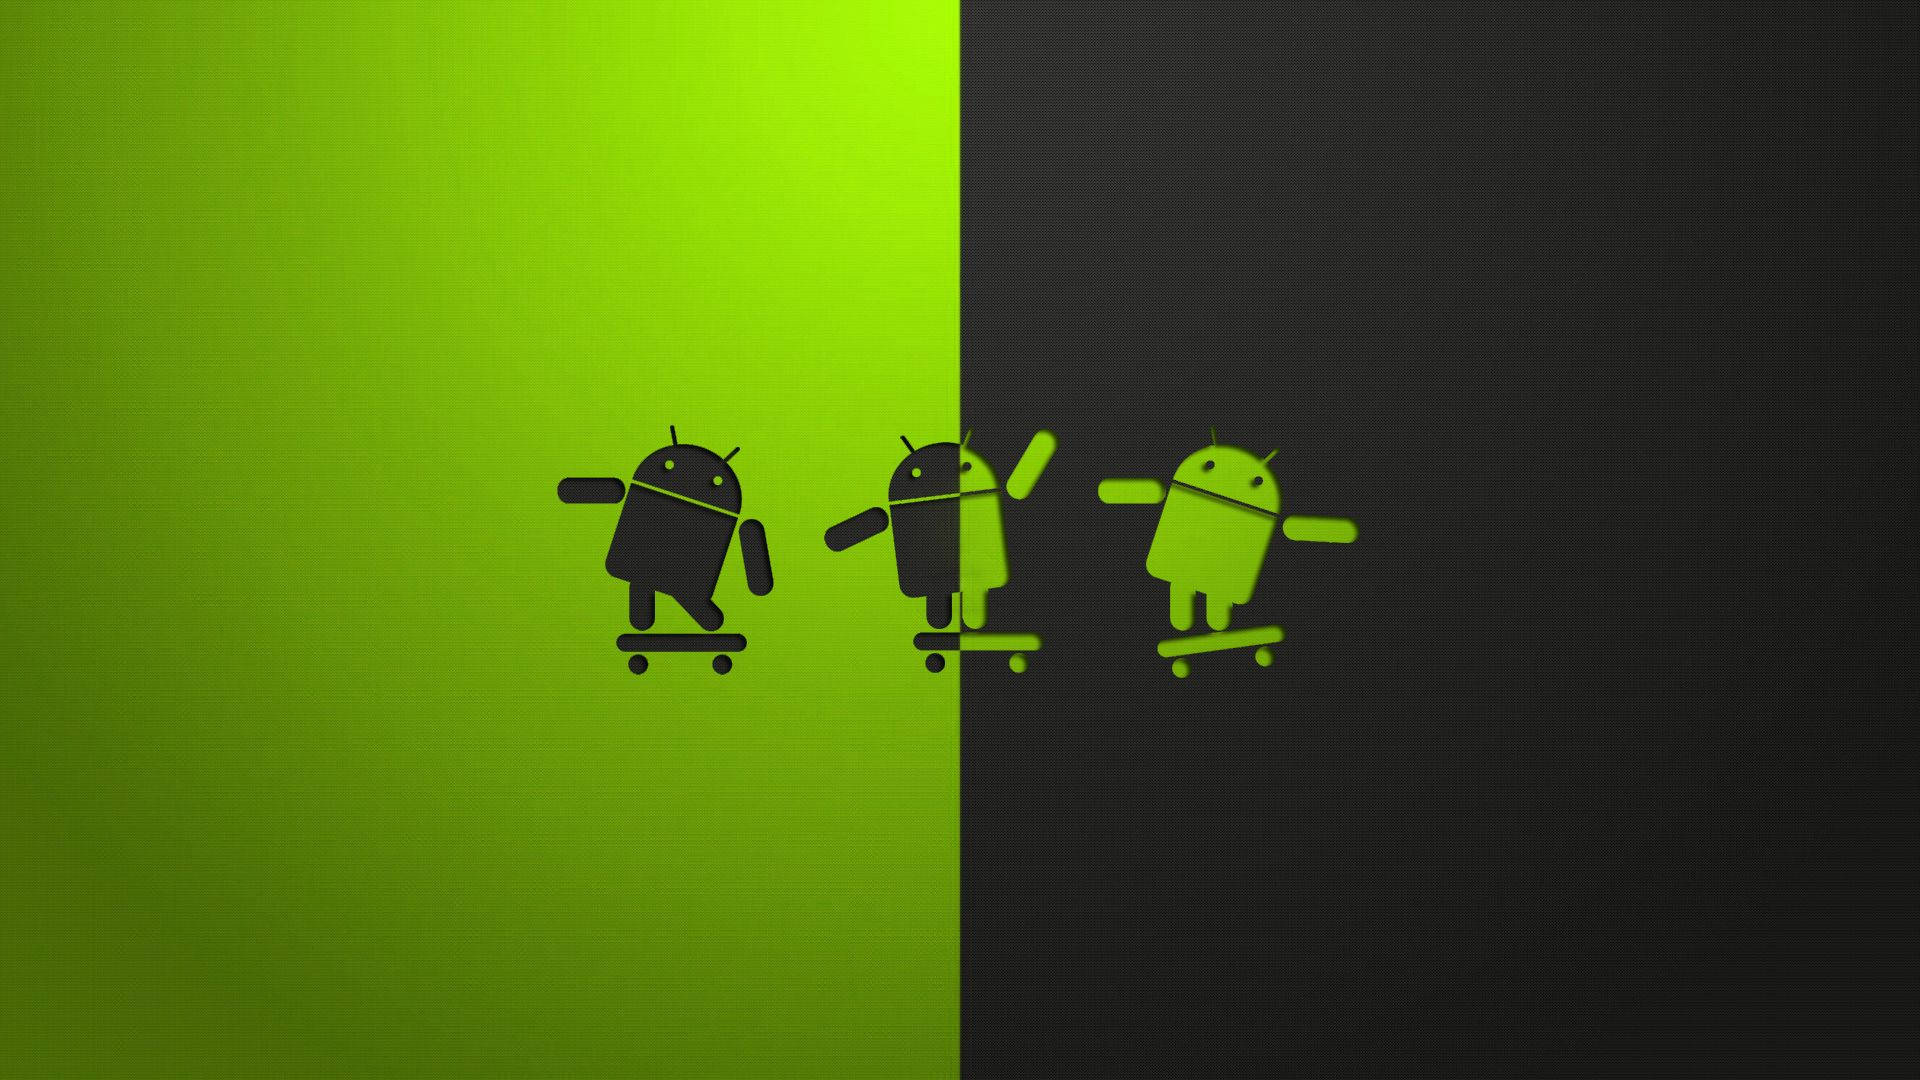 Android Robots In Skateboard Background